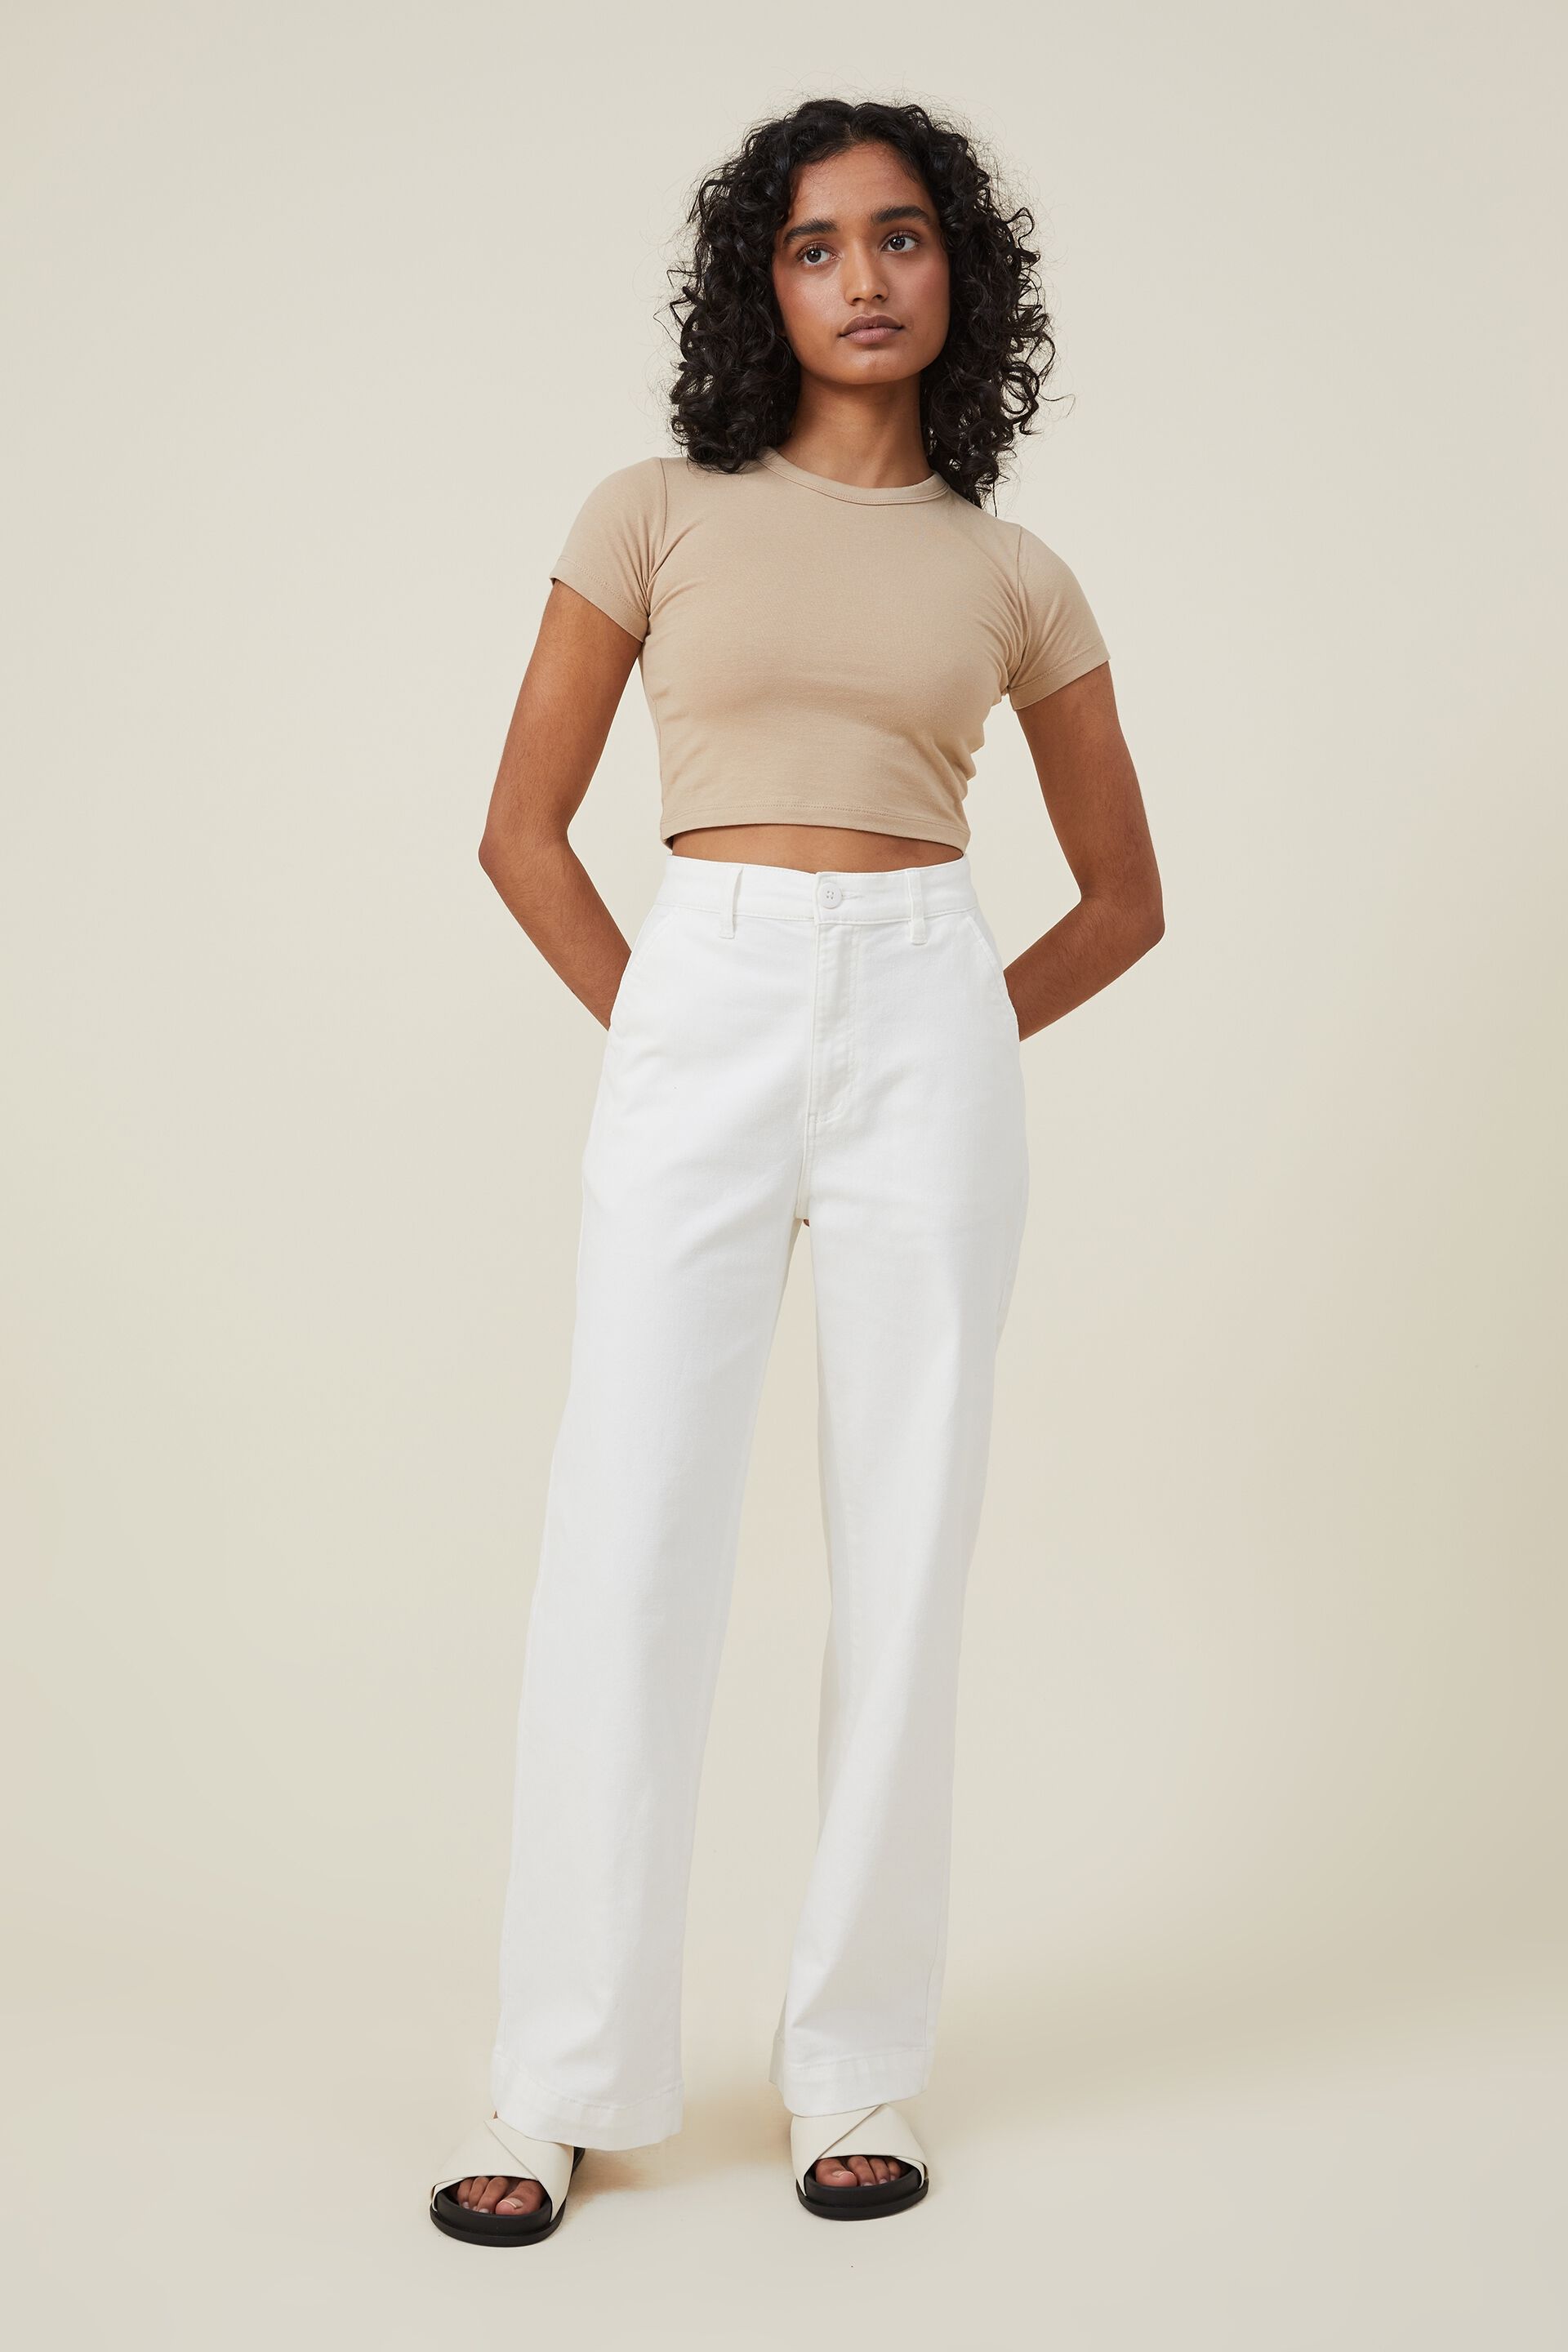 white outfits for women with trousers denim jeans  Ruby Fairs Instagram   White Denim White Jeans White Trousers